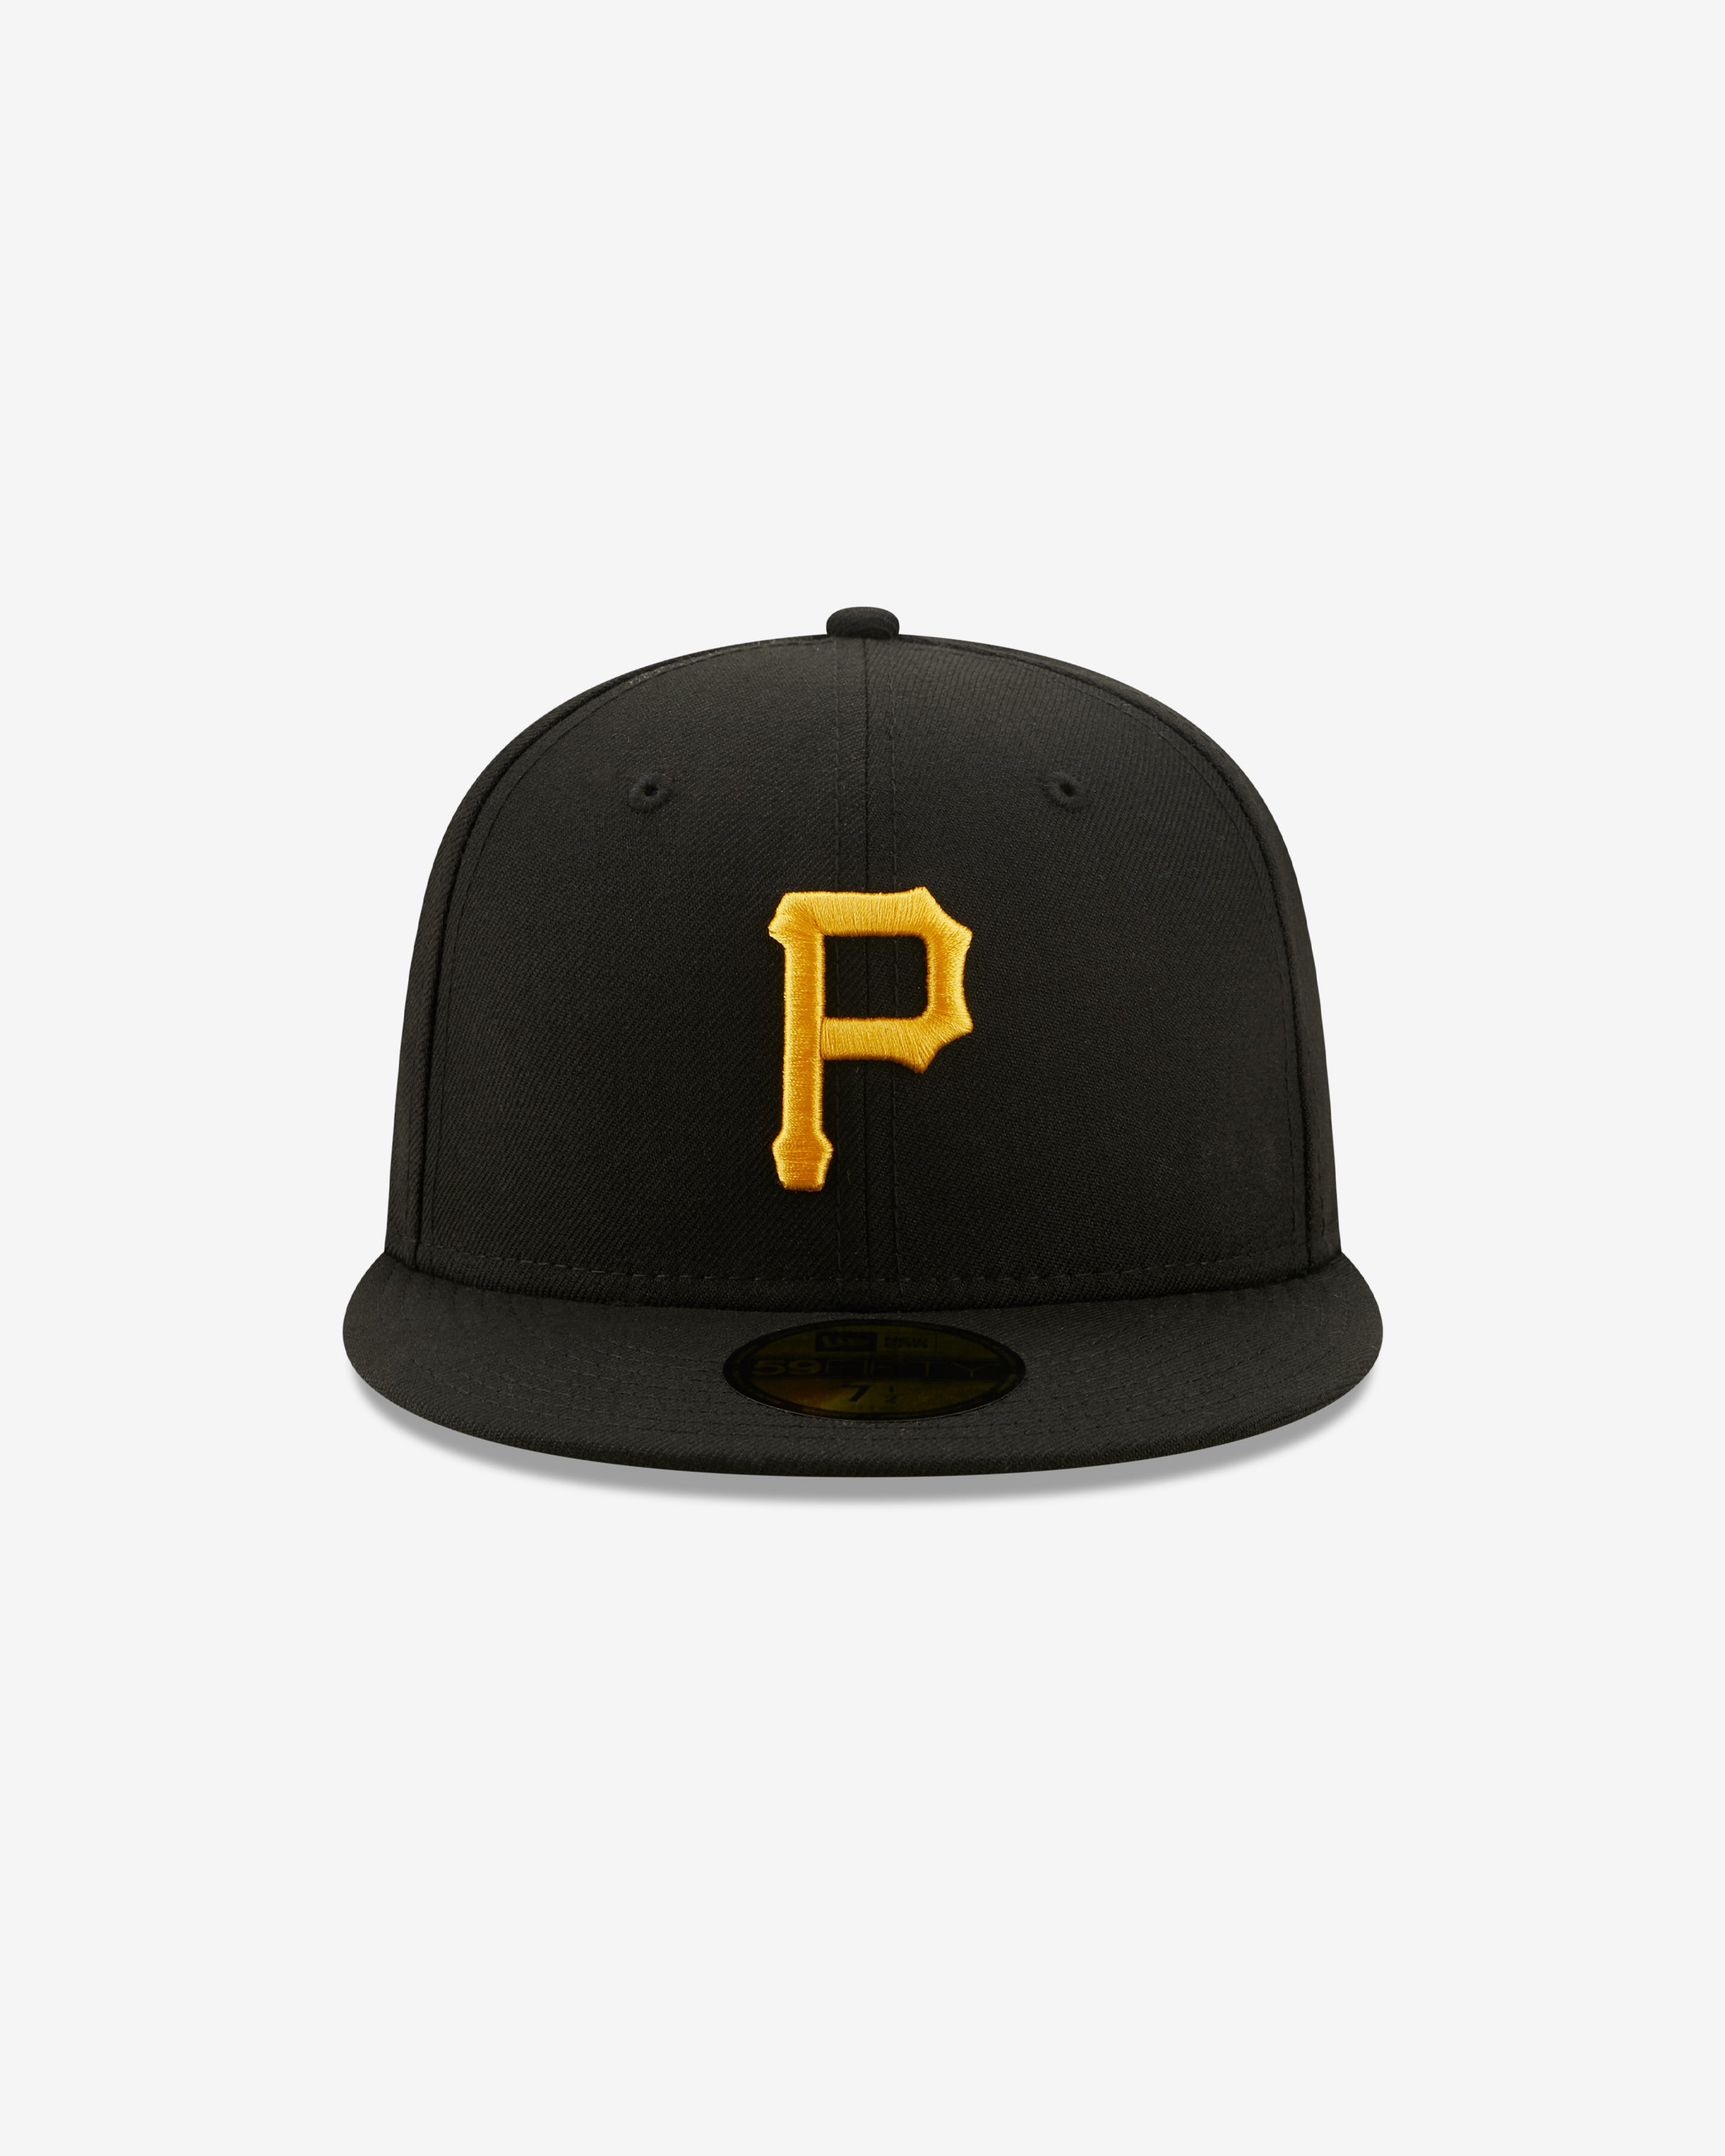 MLB - New 𝒰𝓃𝒾𝓈 in the Steel City. Via: Pittsburgh Pirates 🔥